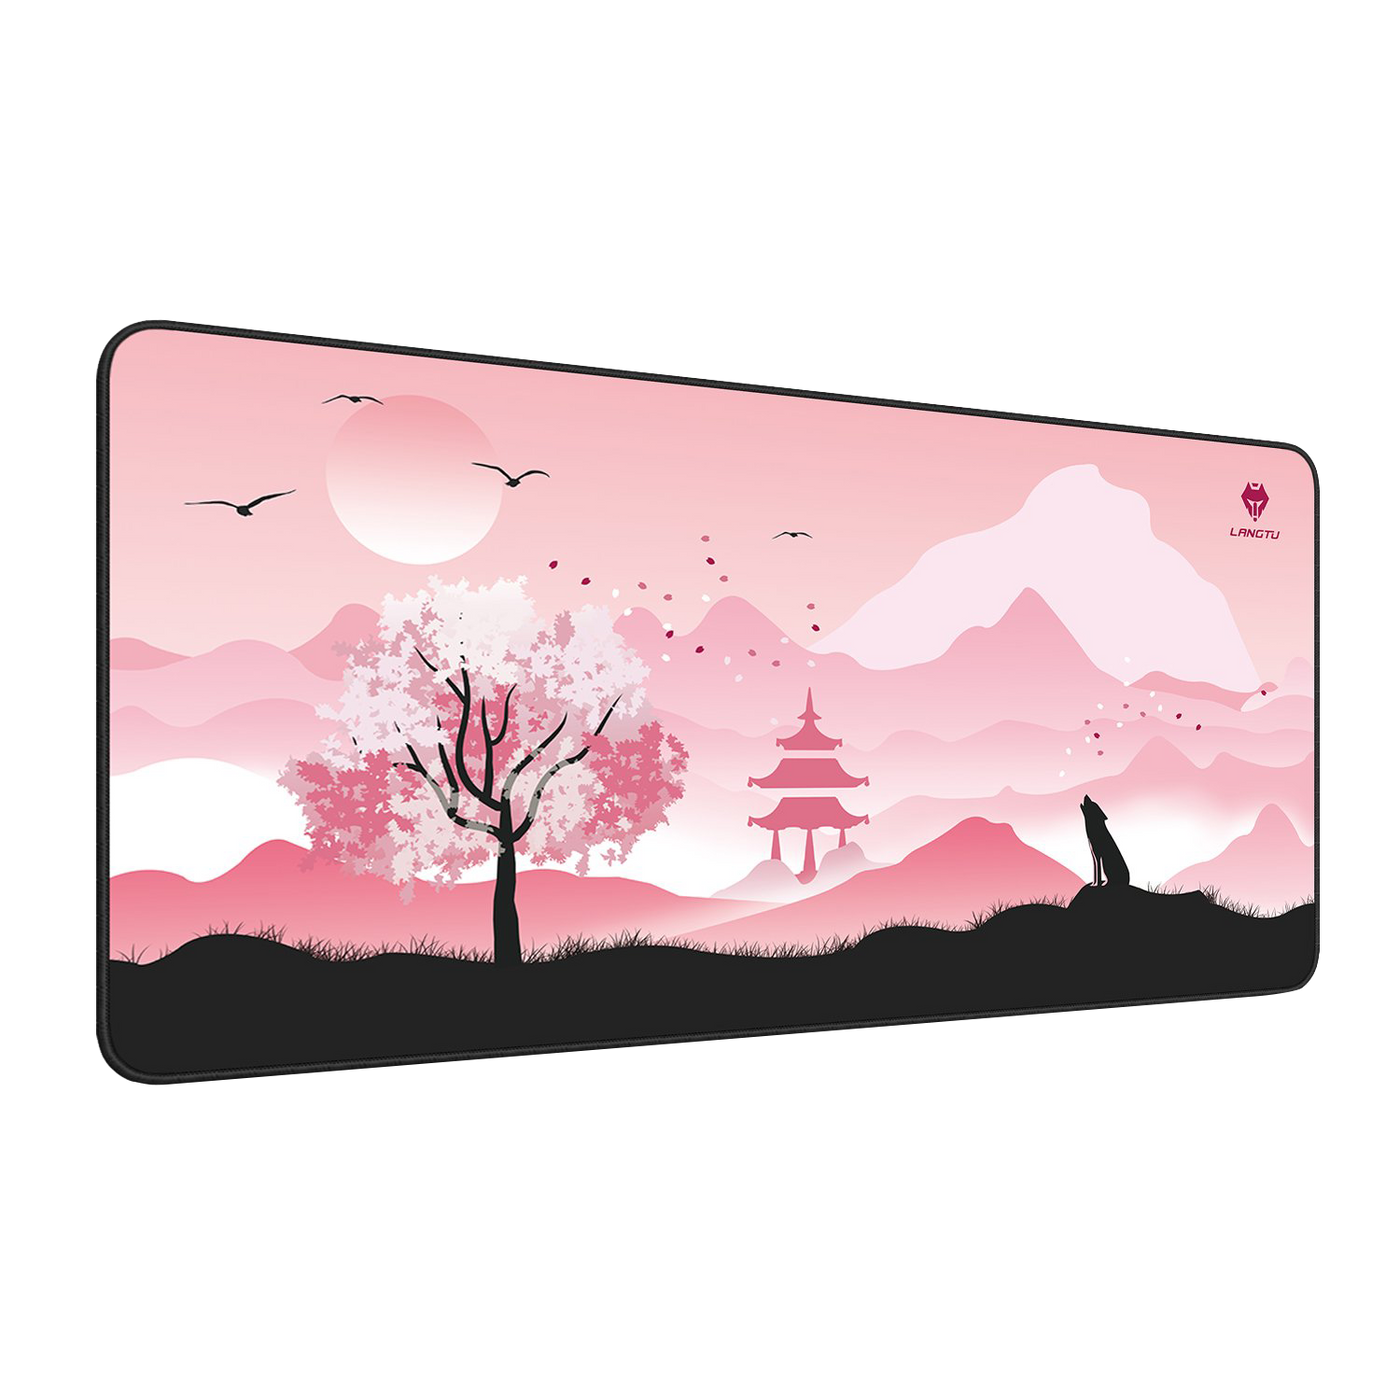 LANGTU extended spring theme mouse pad